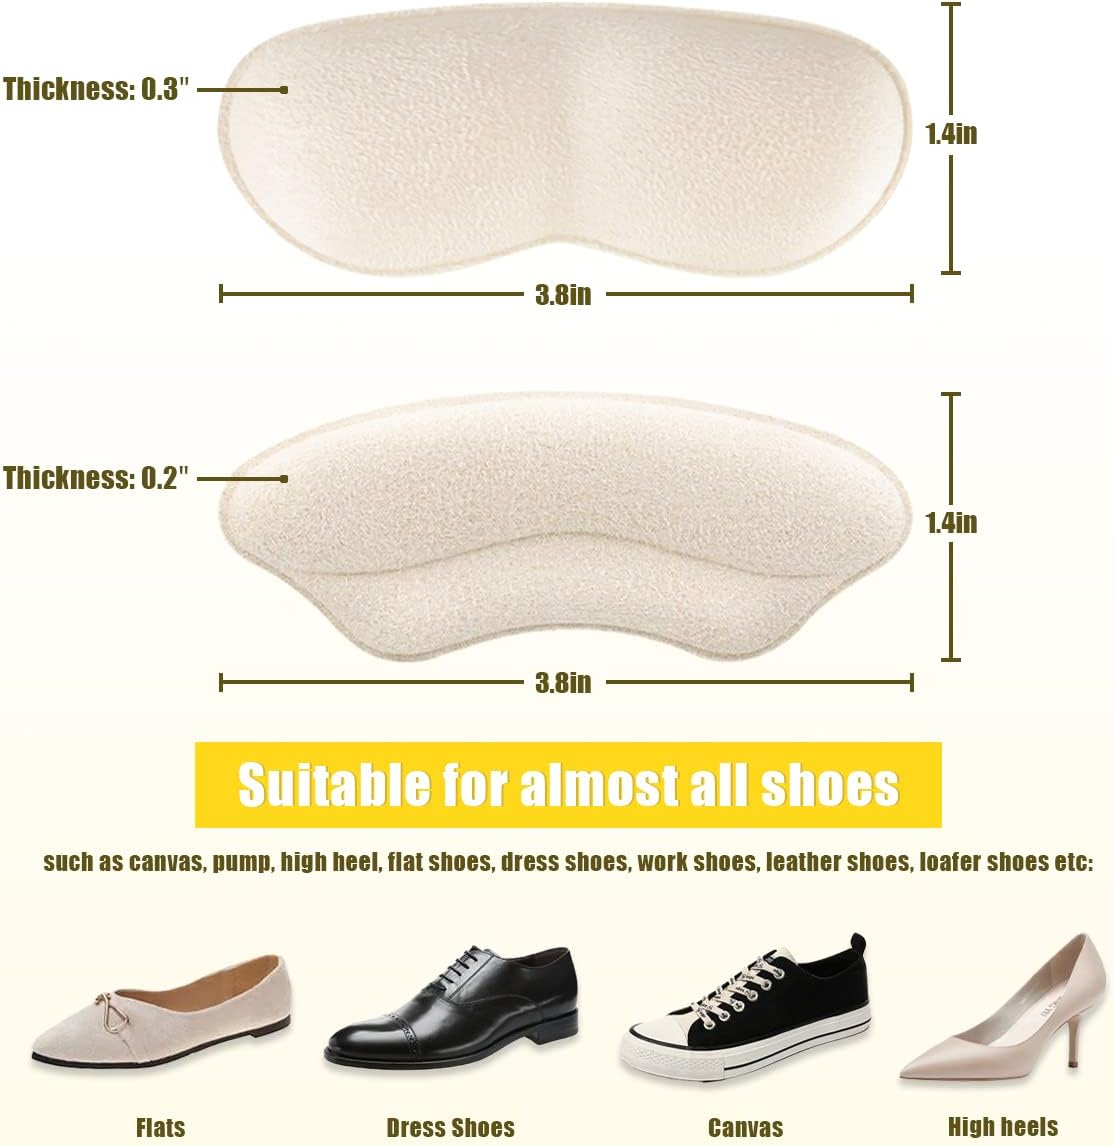 Heel Grips Liners for Loose Shoes, Heel Cushions Inserts Improved Shoe Too Big Comfort and Fit, Heel Protector Shoe Inserts for Women Prevent Heel Blister and Slip (Pale Apricot)